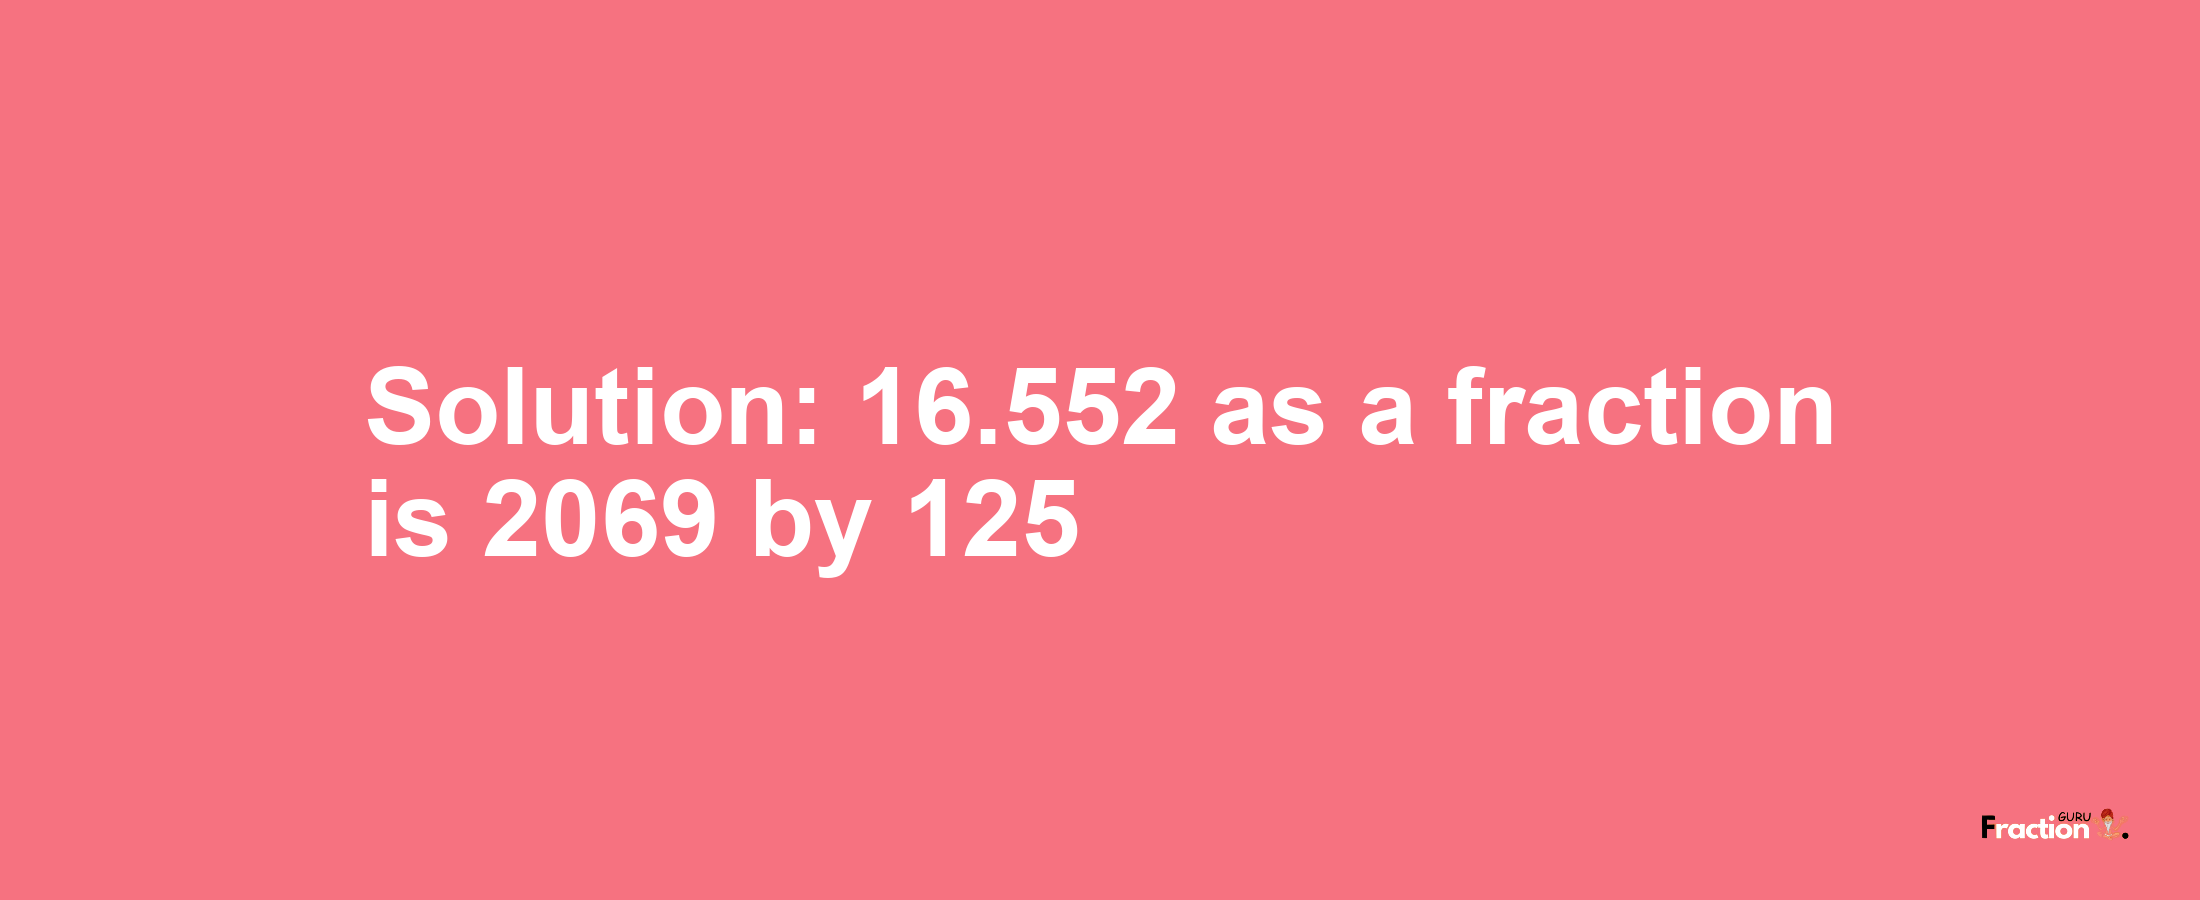 Solution:16.552 as a fraction is 2069/125